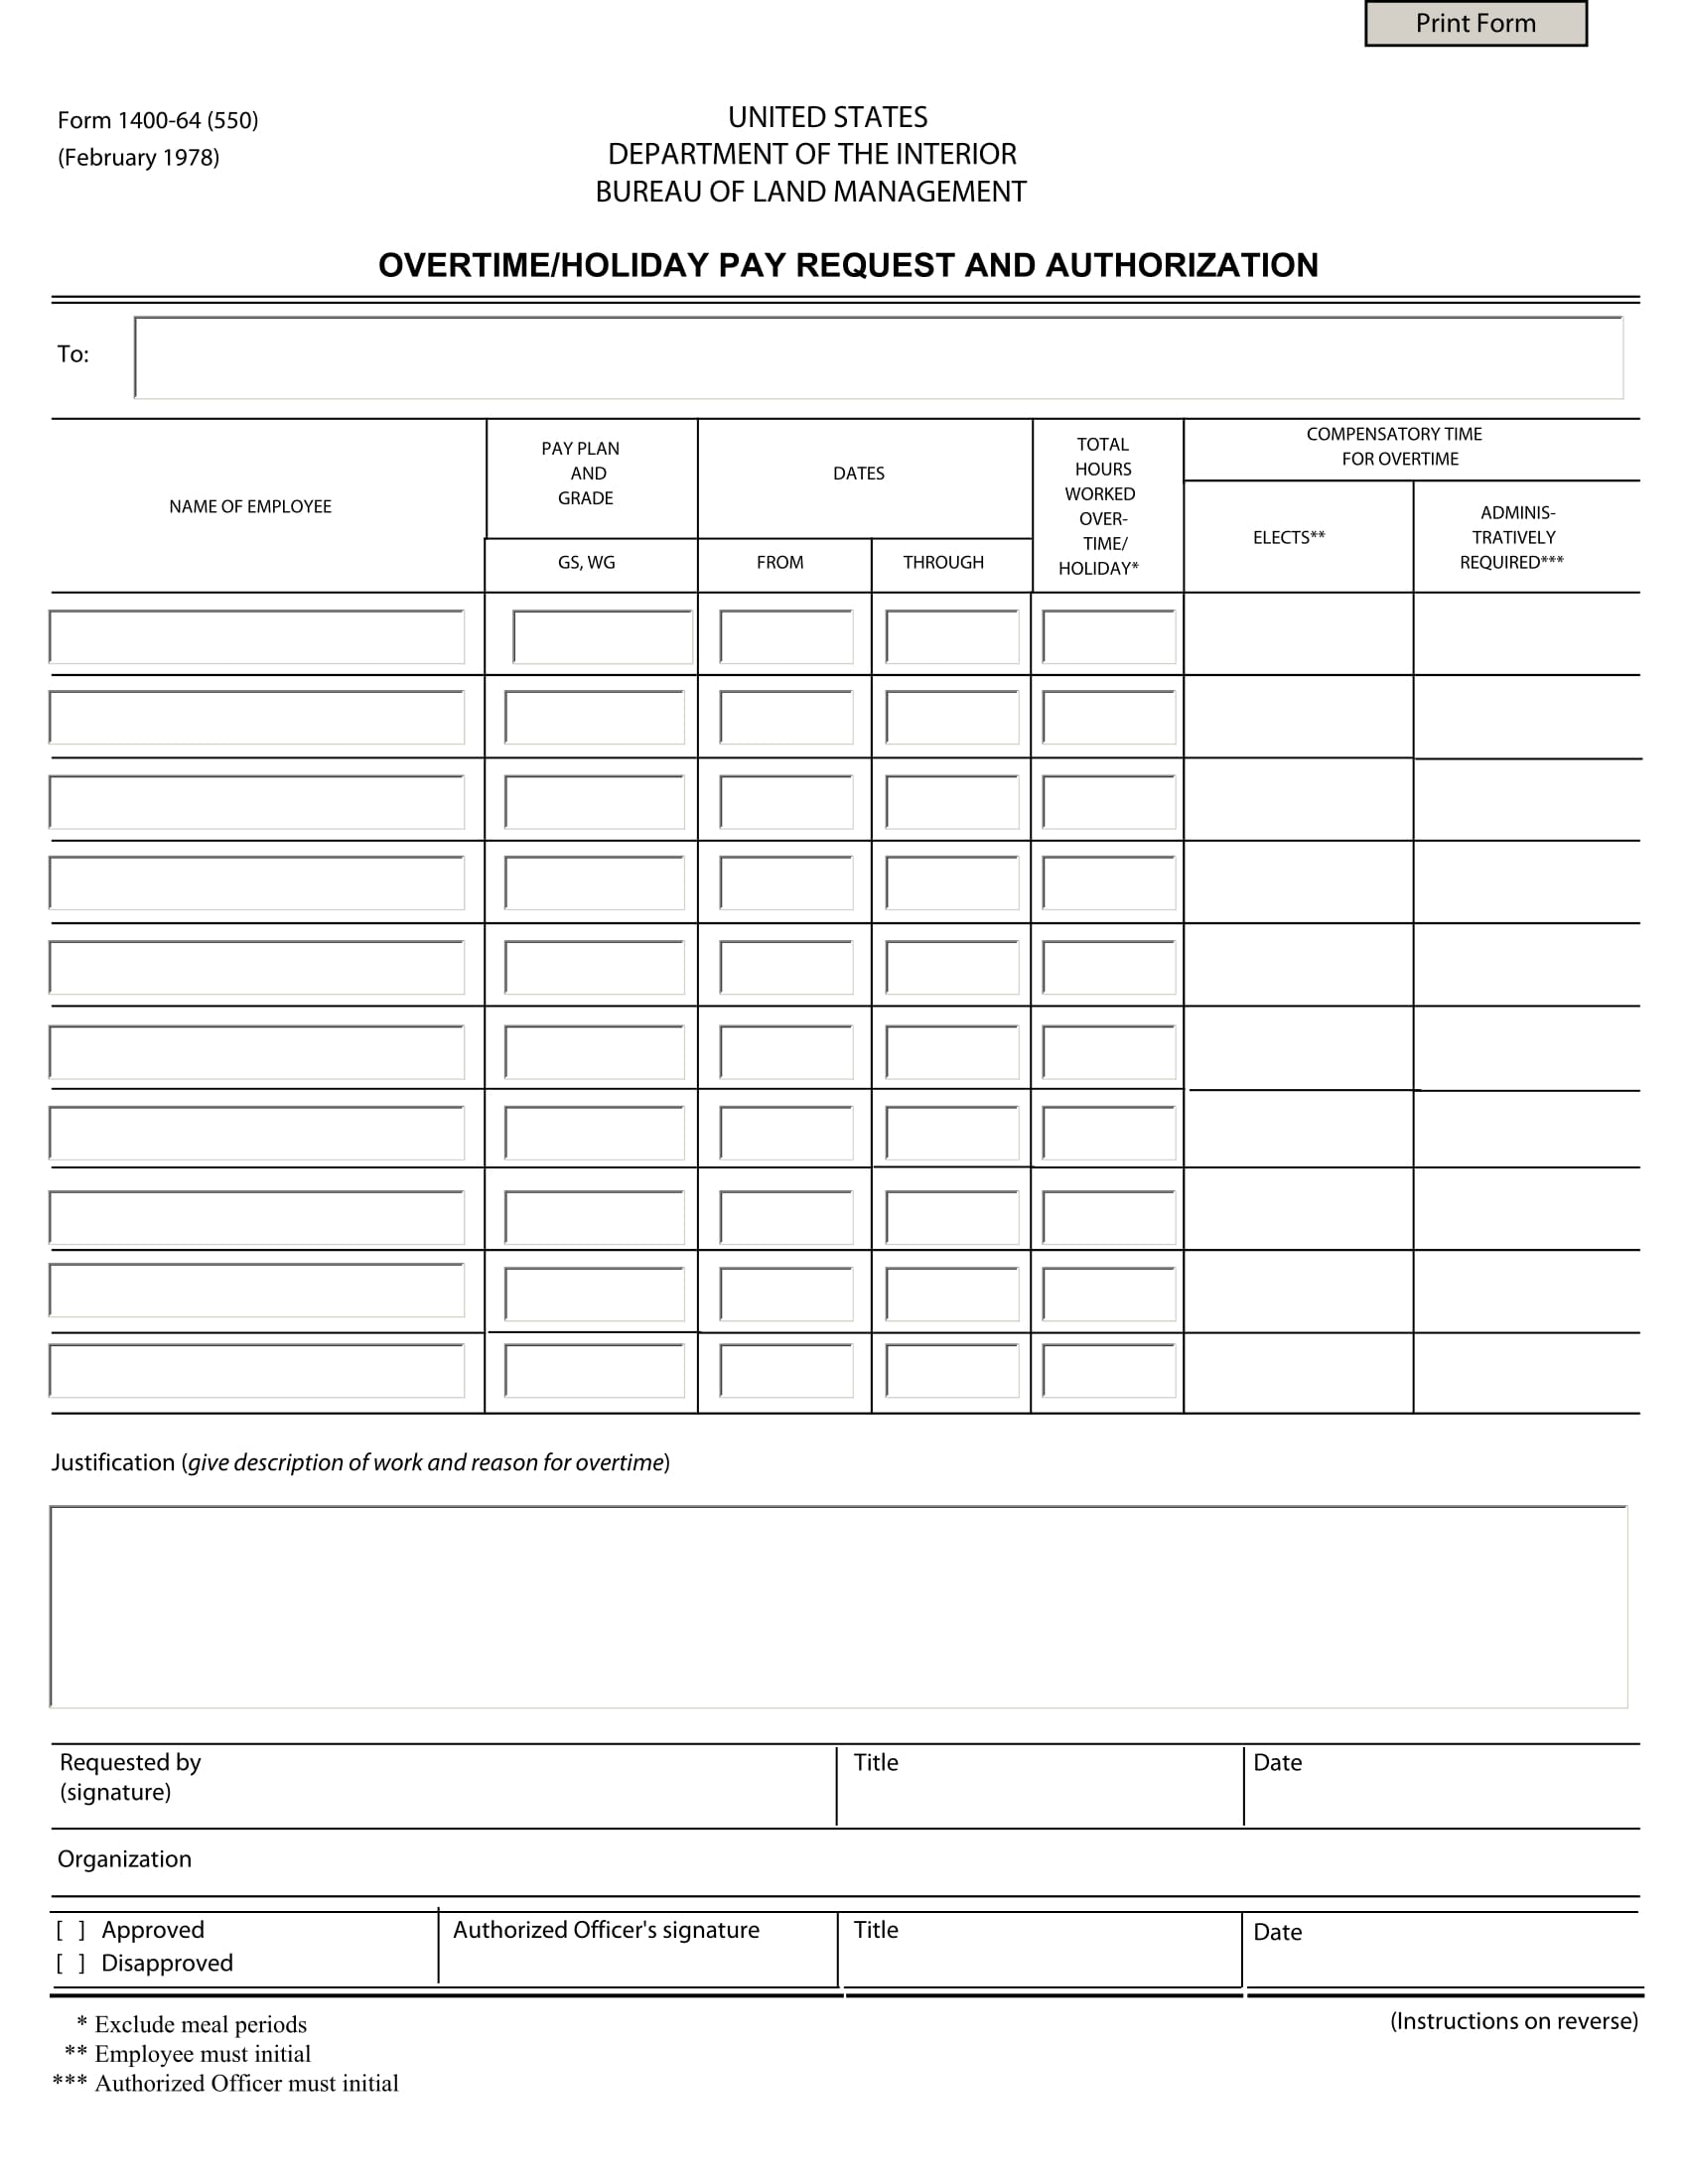 overtime pay request authorization form 1